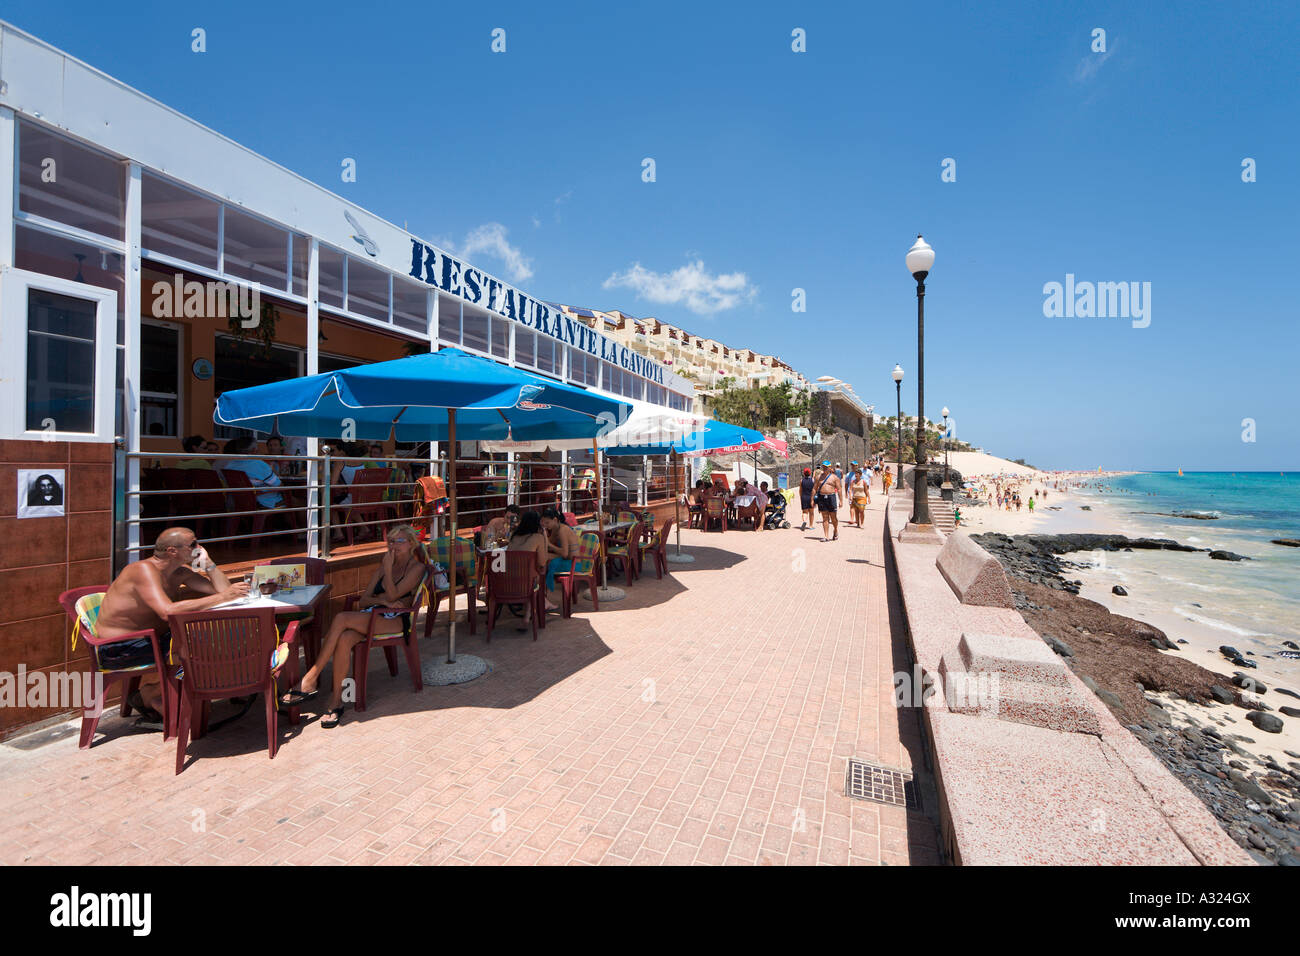 Seafront restaurant in the old town, Jandia (Morro Jable), Fuerteventura, Canary Islands, Spain Stock Photo